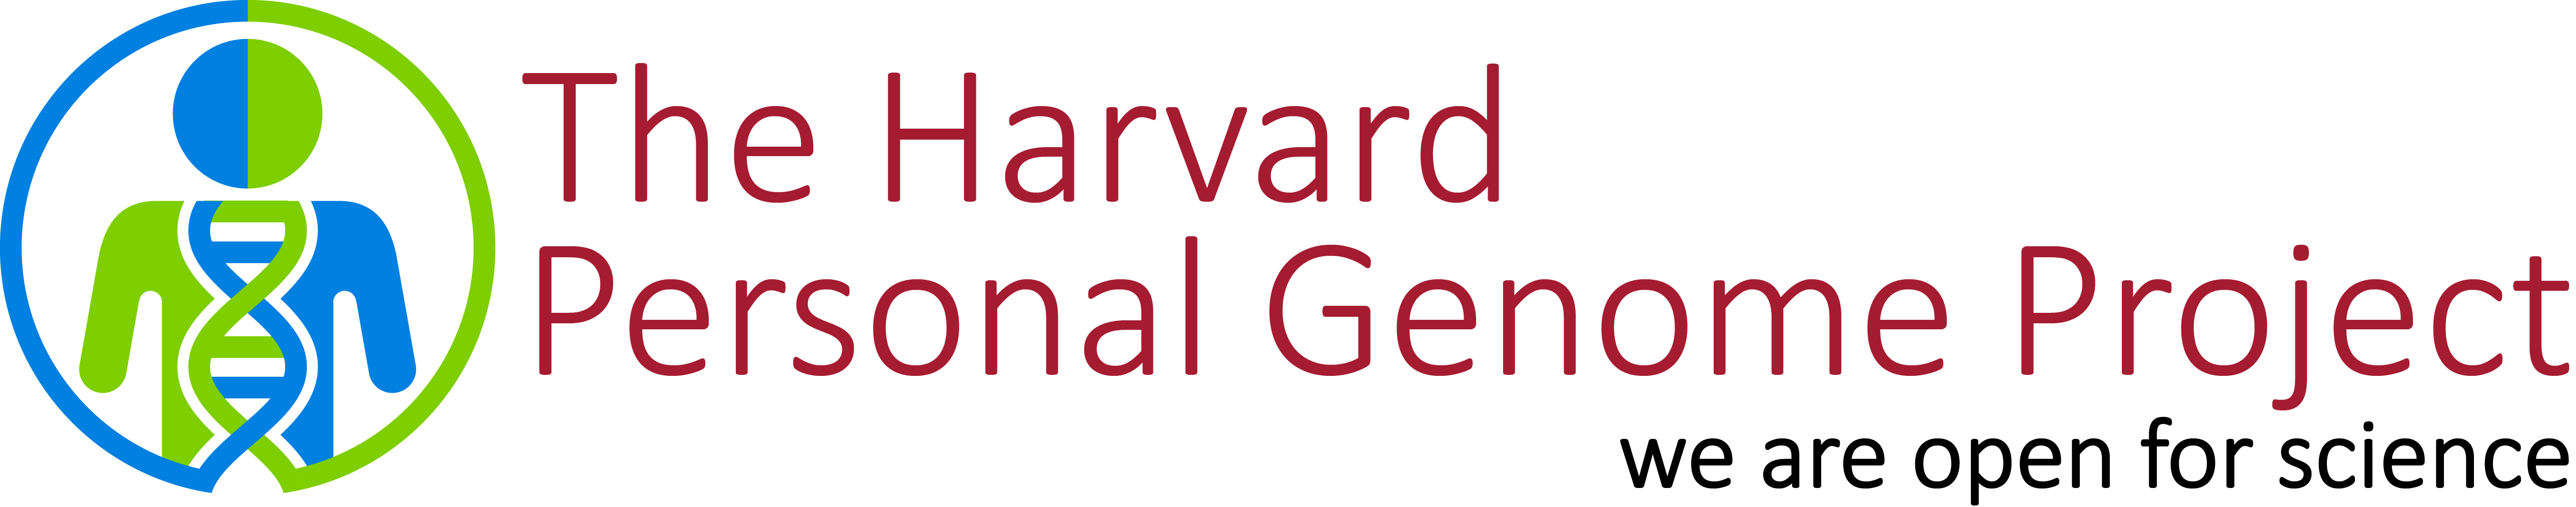 The Harvard Personal Genome Project (PGP)